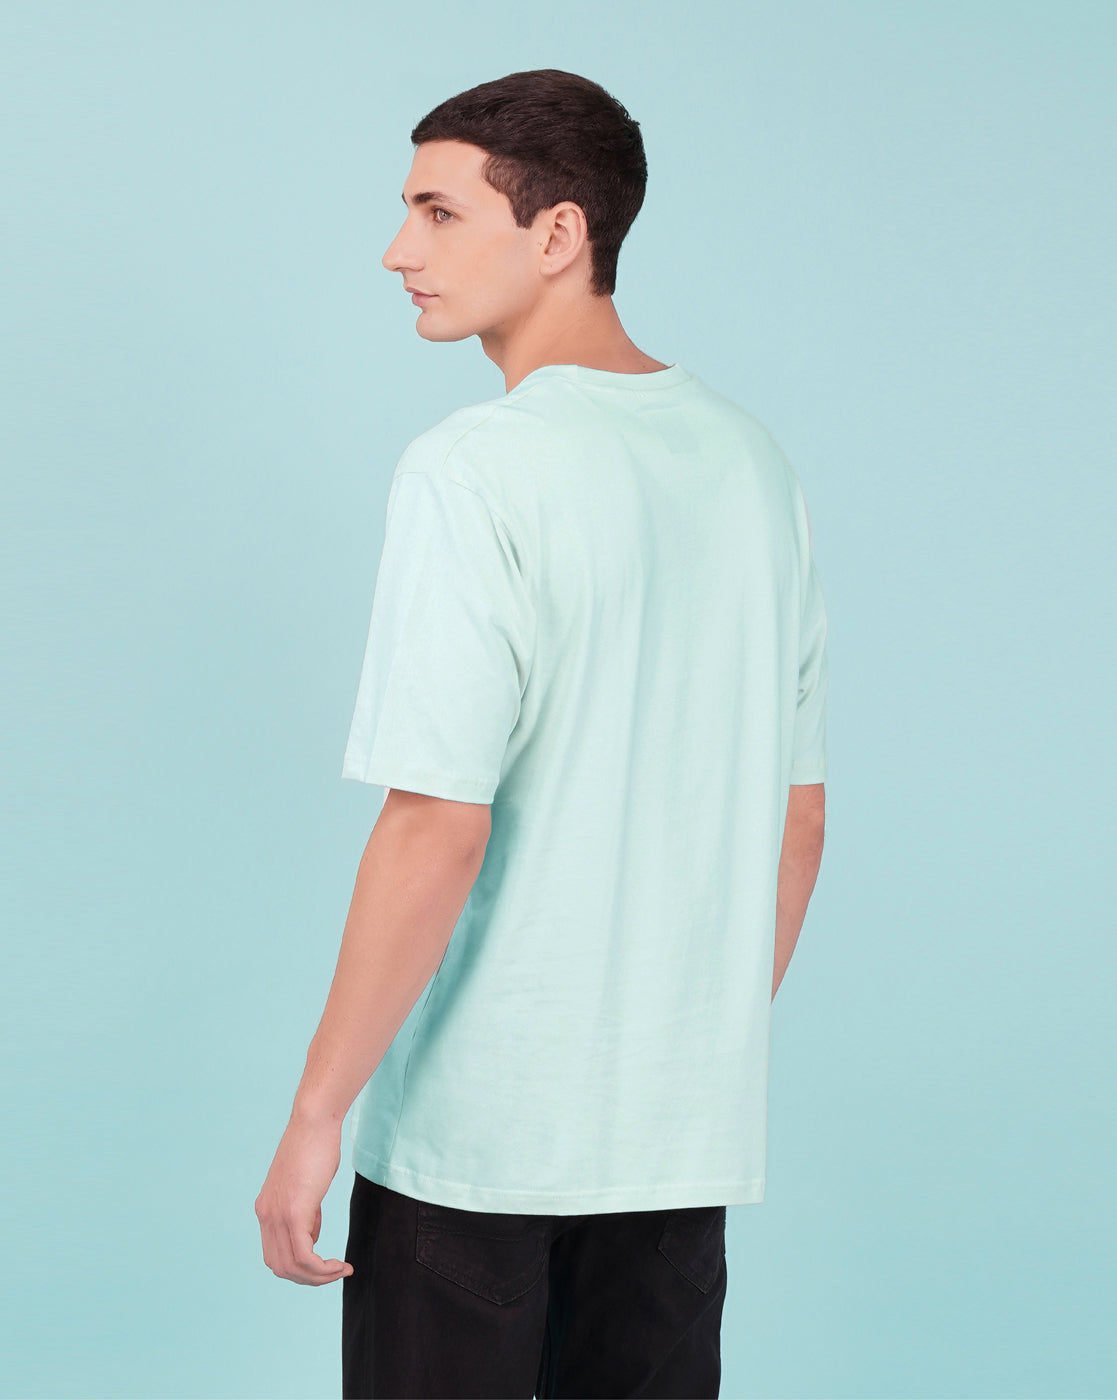 Nusyl Powder Blue Let's Groove Printed oversized t-shirt